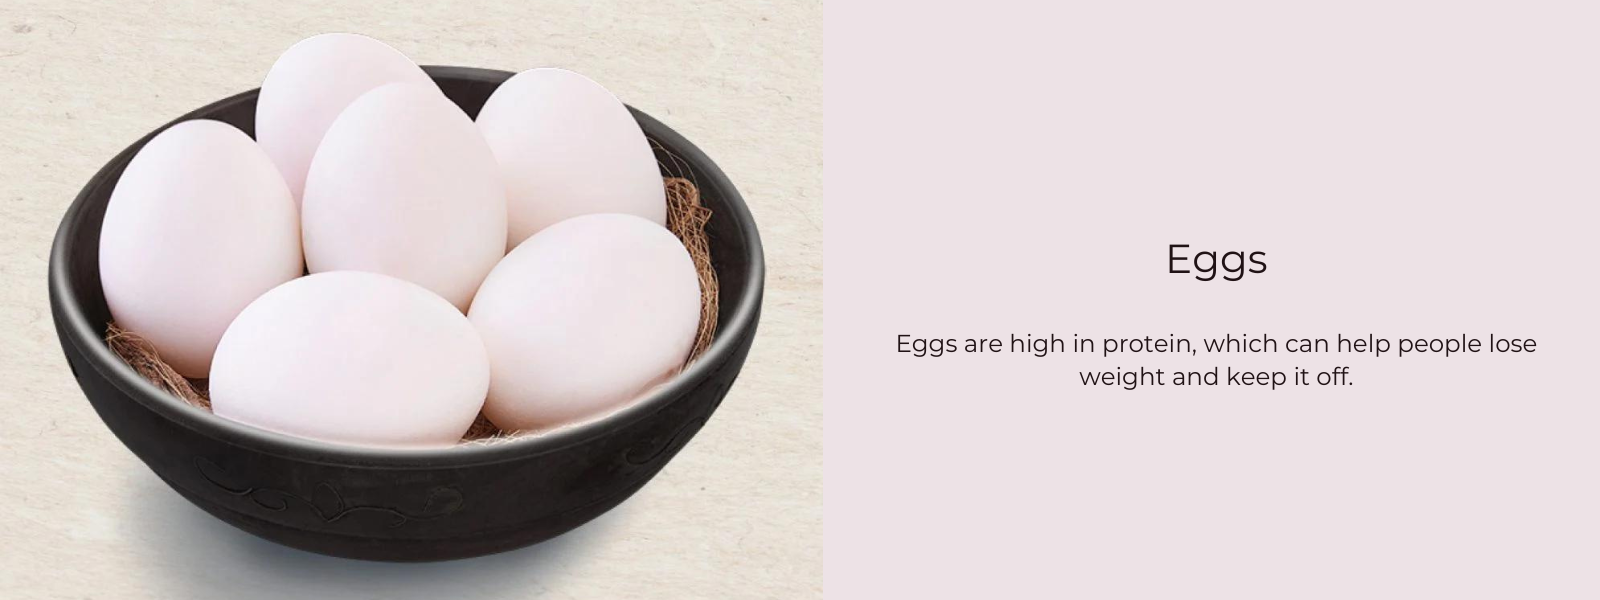 Eggs – Health Benefits, Uses and Important Facts